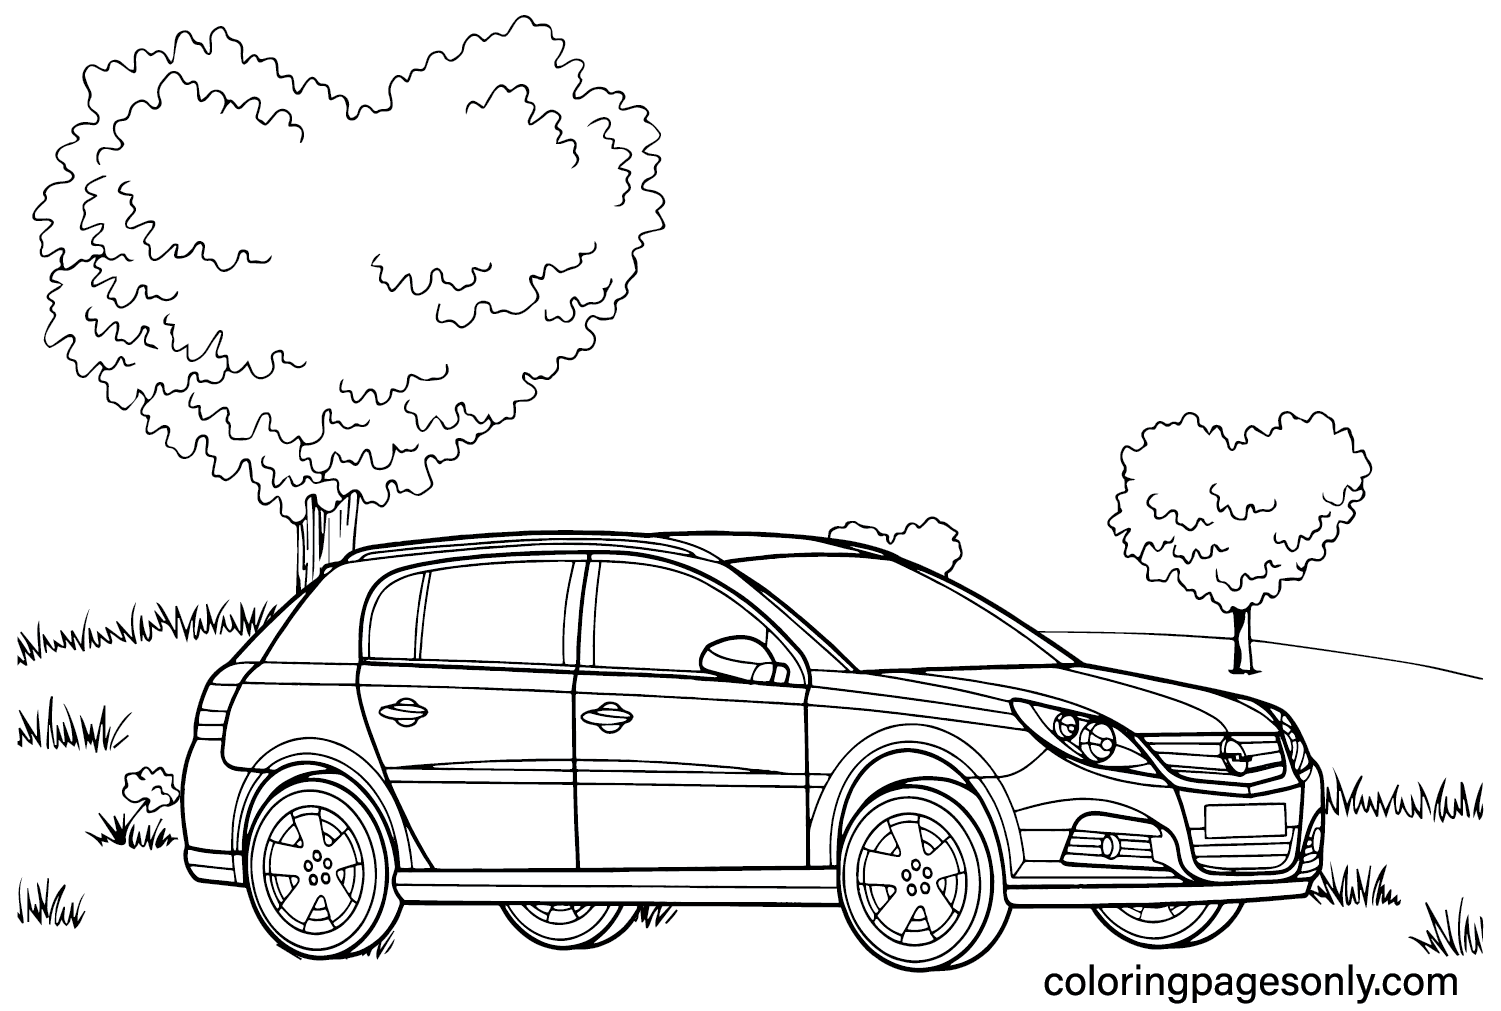 Opel Signum Coloring Page from Opel